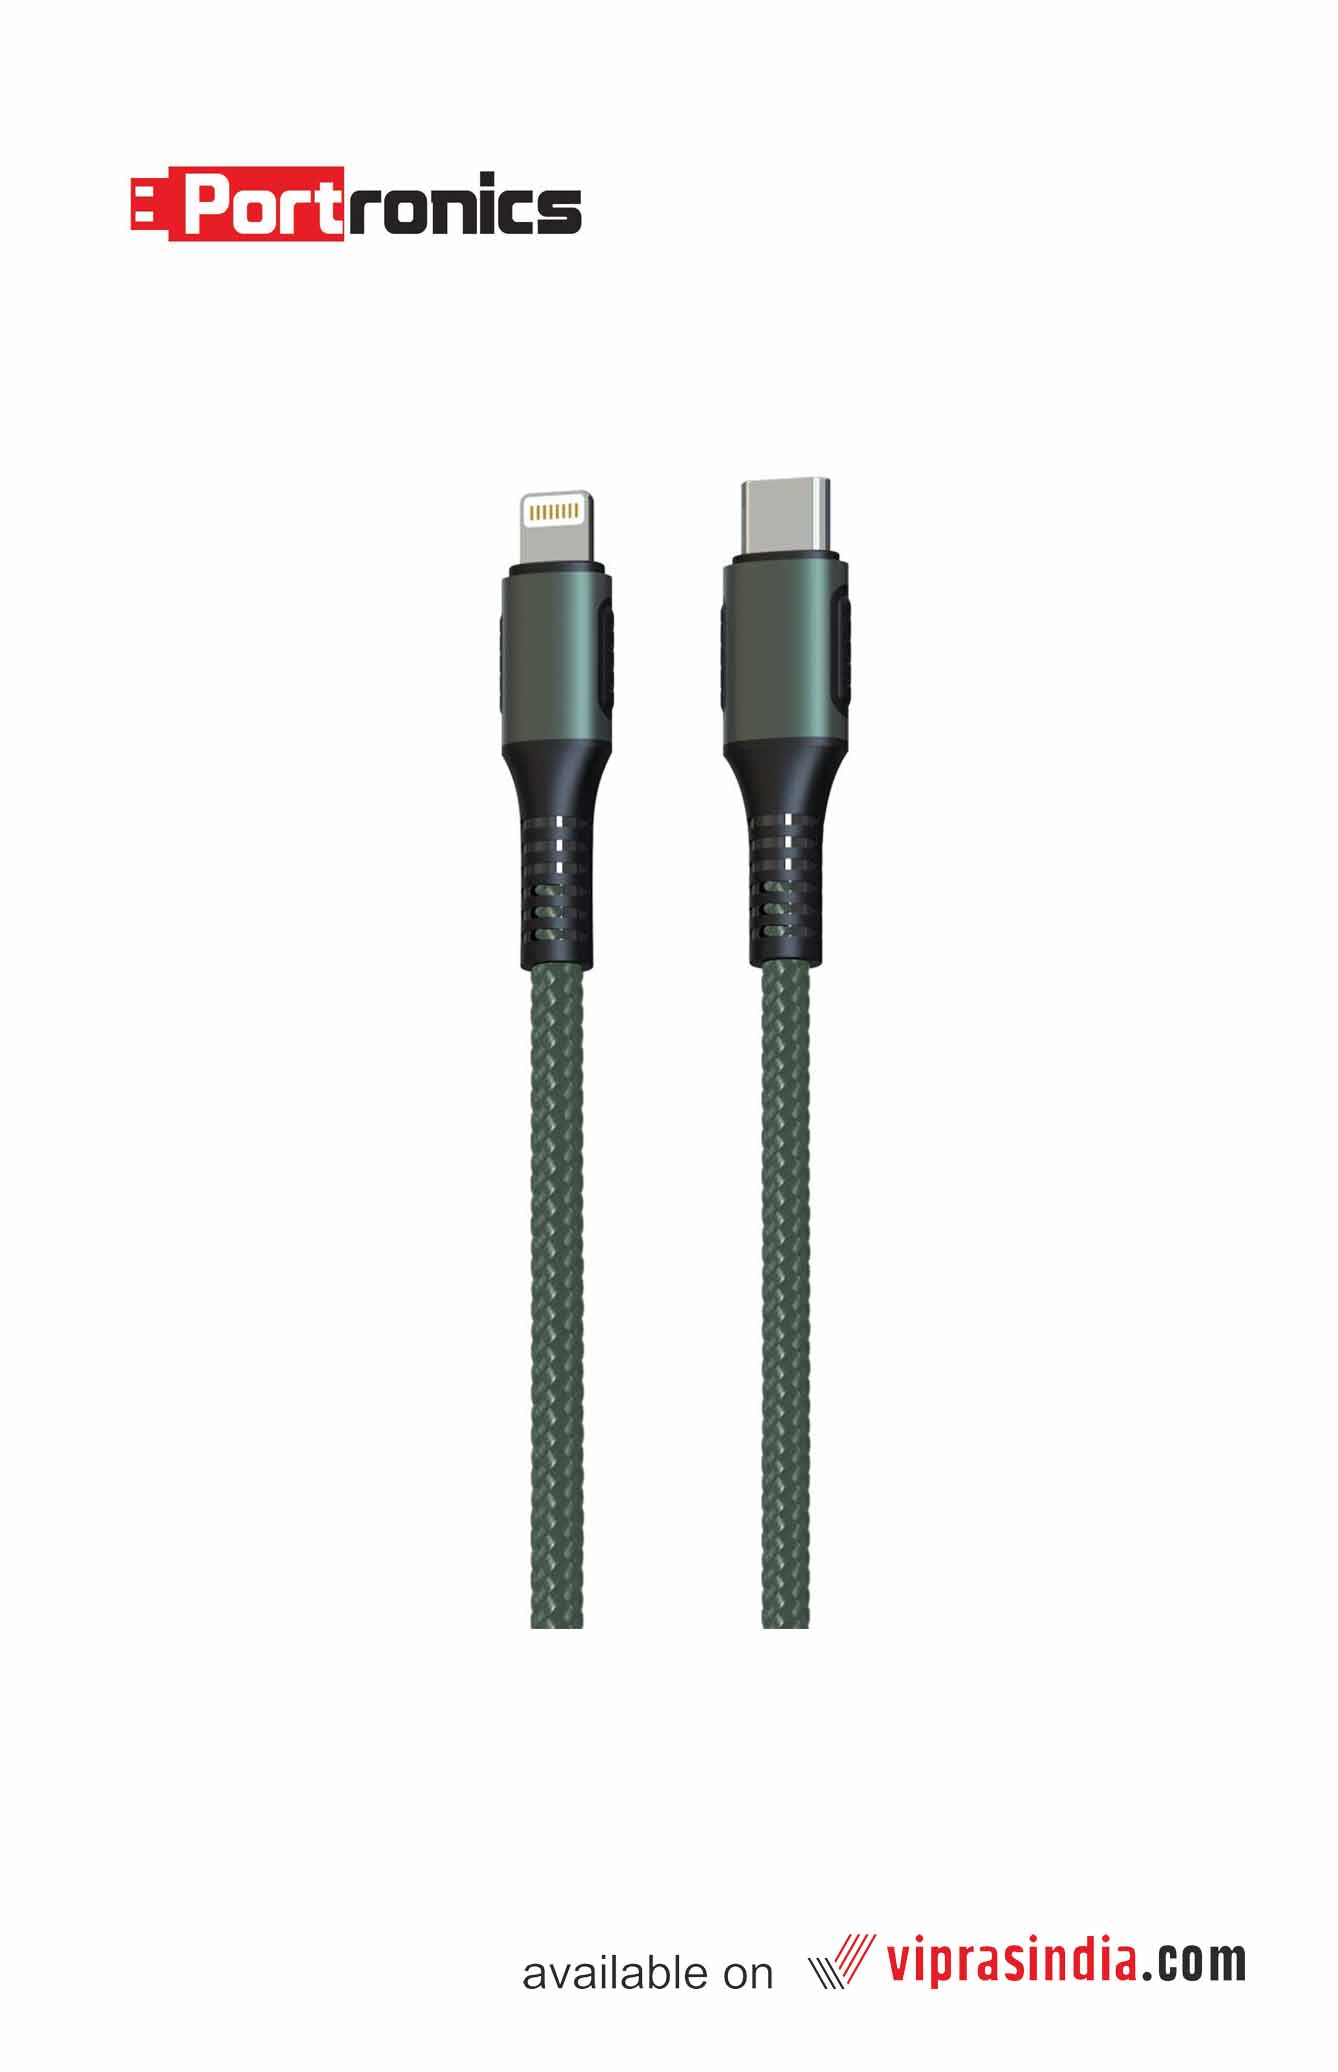 Portronics Konnect CL 18W POR-1067 Type-C to 8 Pin USB 1.2M Cable with Power Delivery & 3A Quick Charge Support, Nylon Braided for All Type-C and 8 Pin Devices, Green